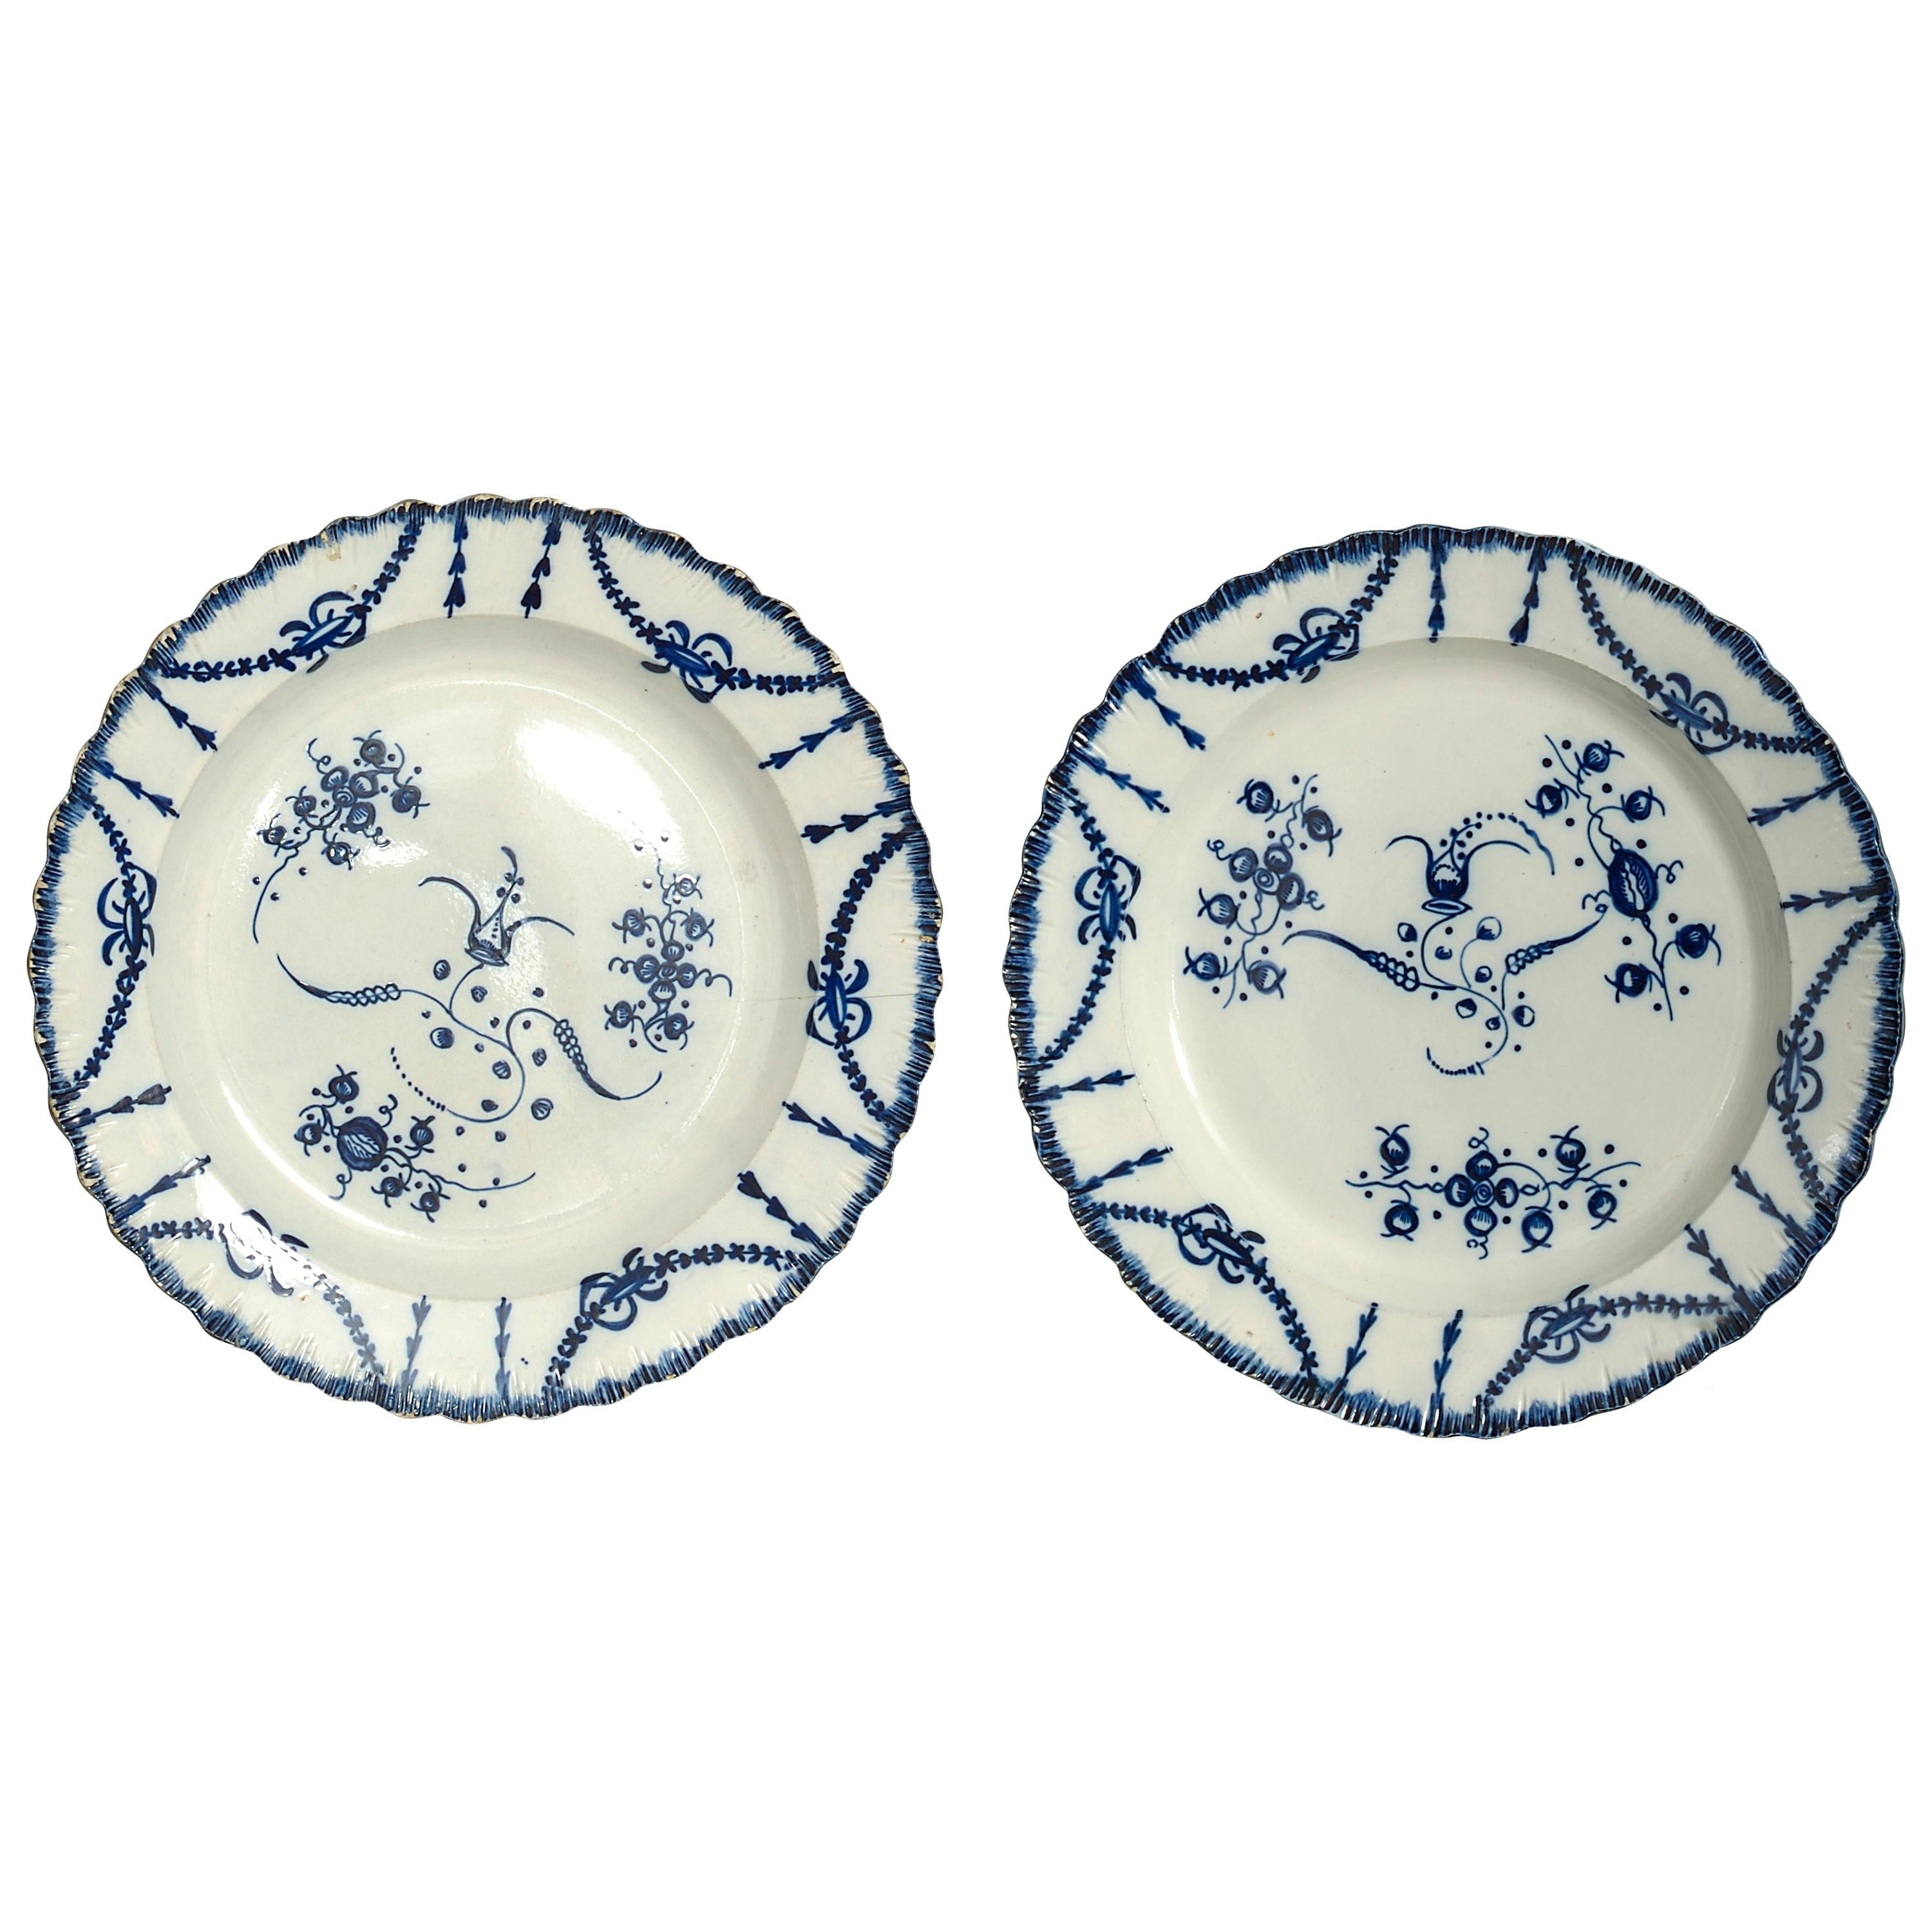 Pair of Late 18th Century Blue and White Staffordshire Pottery Plates